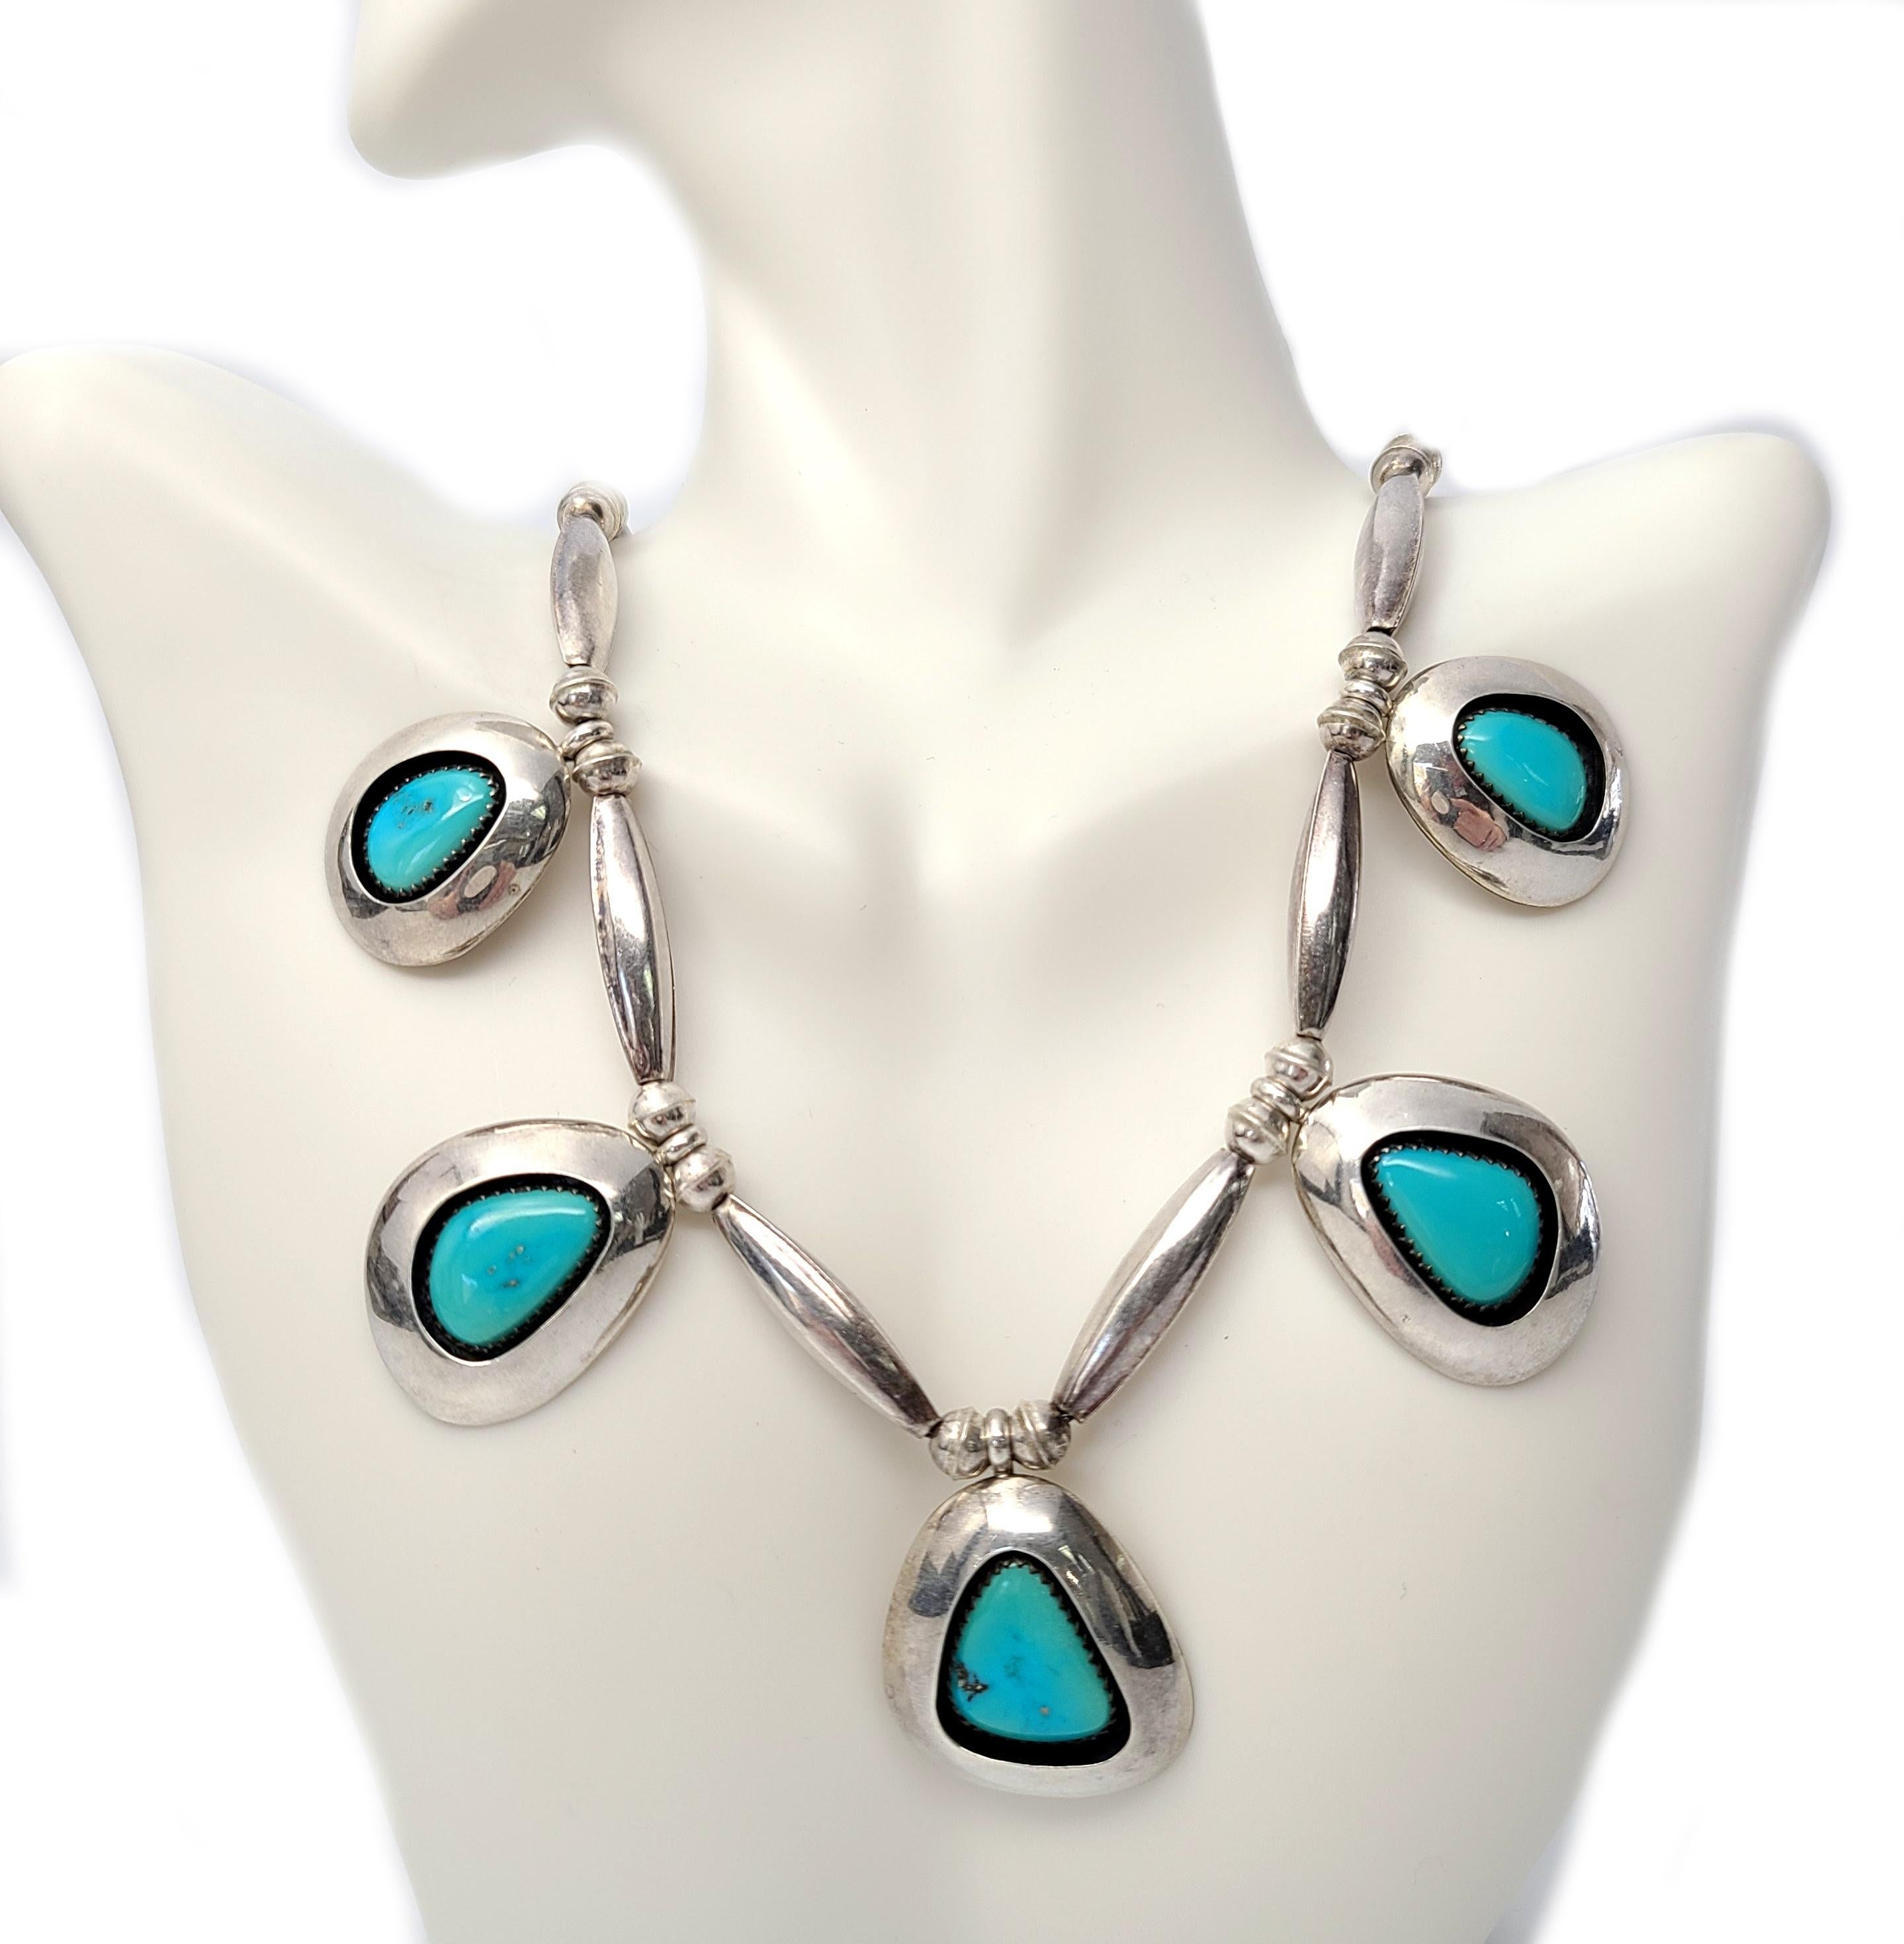 Native American Bernadette Eustace Sterling Silver Turquoise Shadow Box Necklace 1